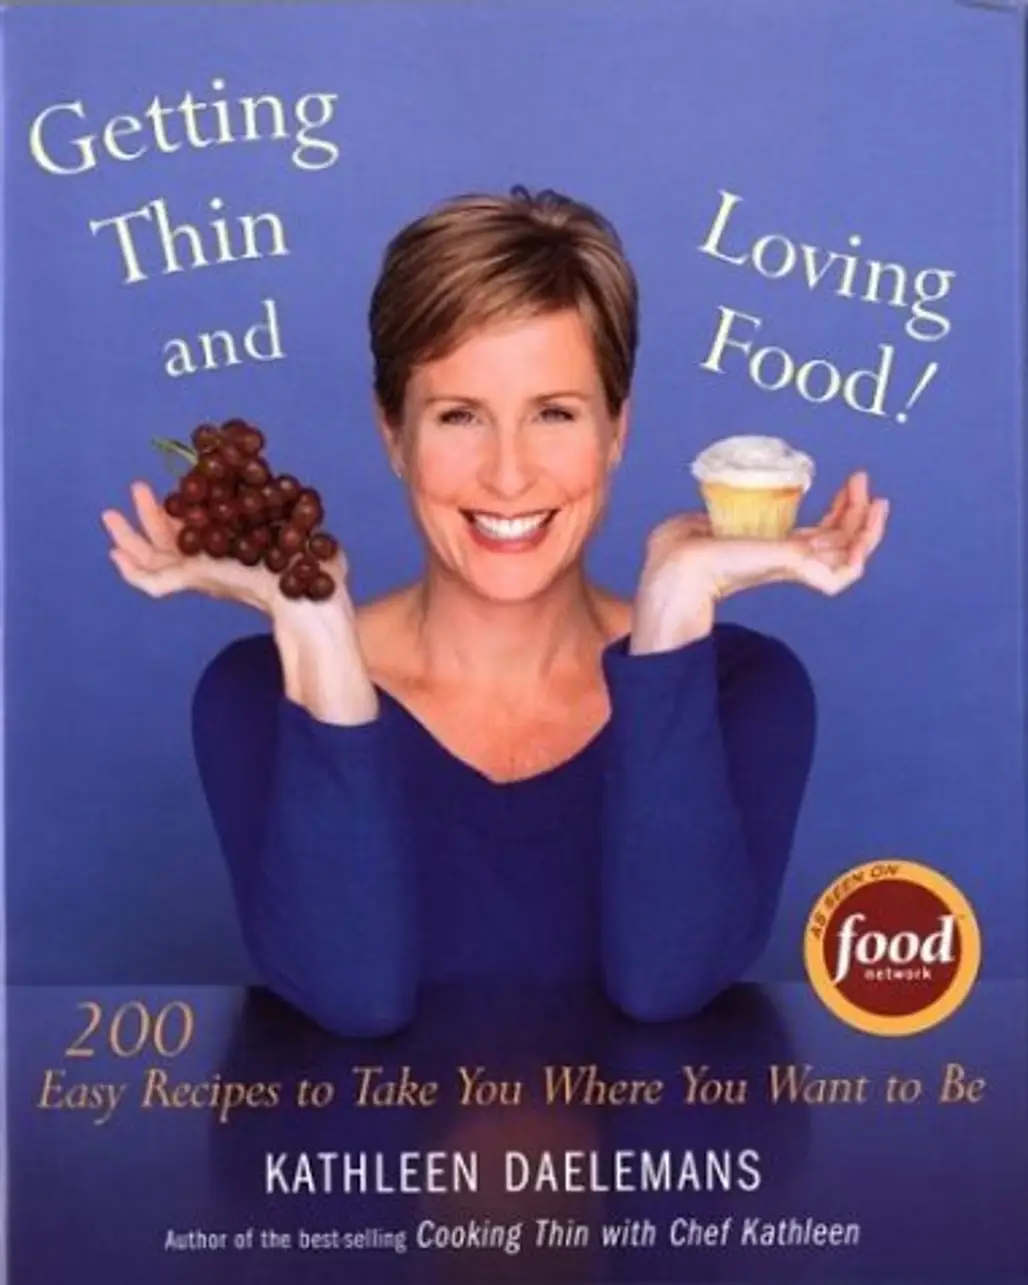 Getting Thin and Loving Food! by Kathleen Daelemans